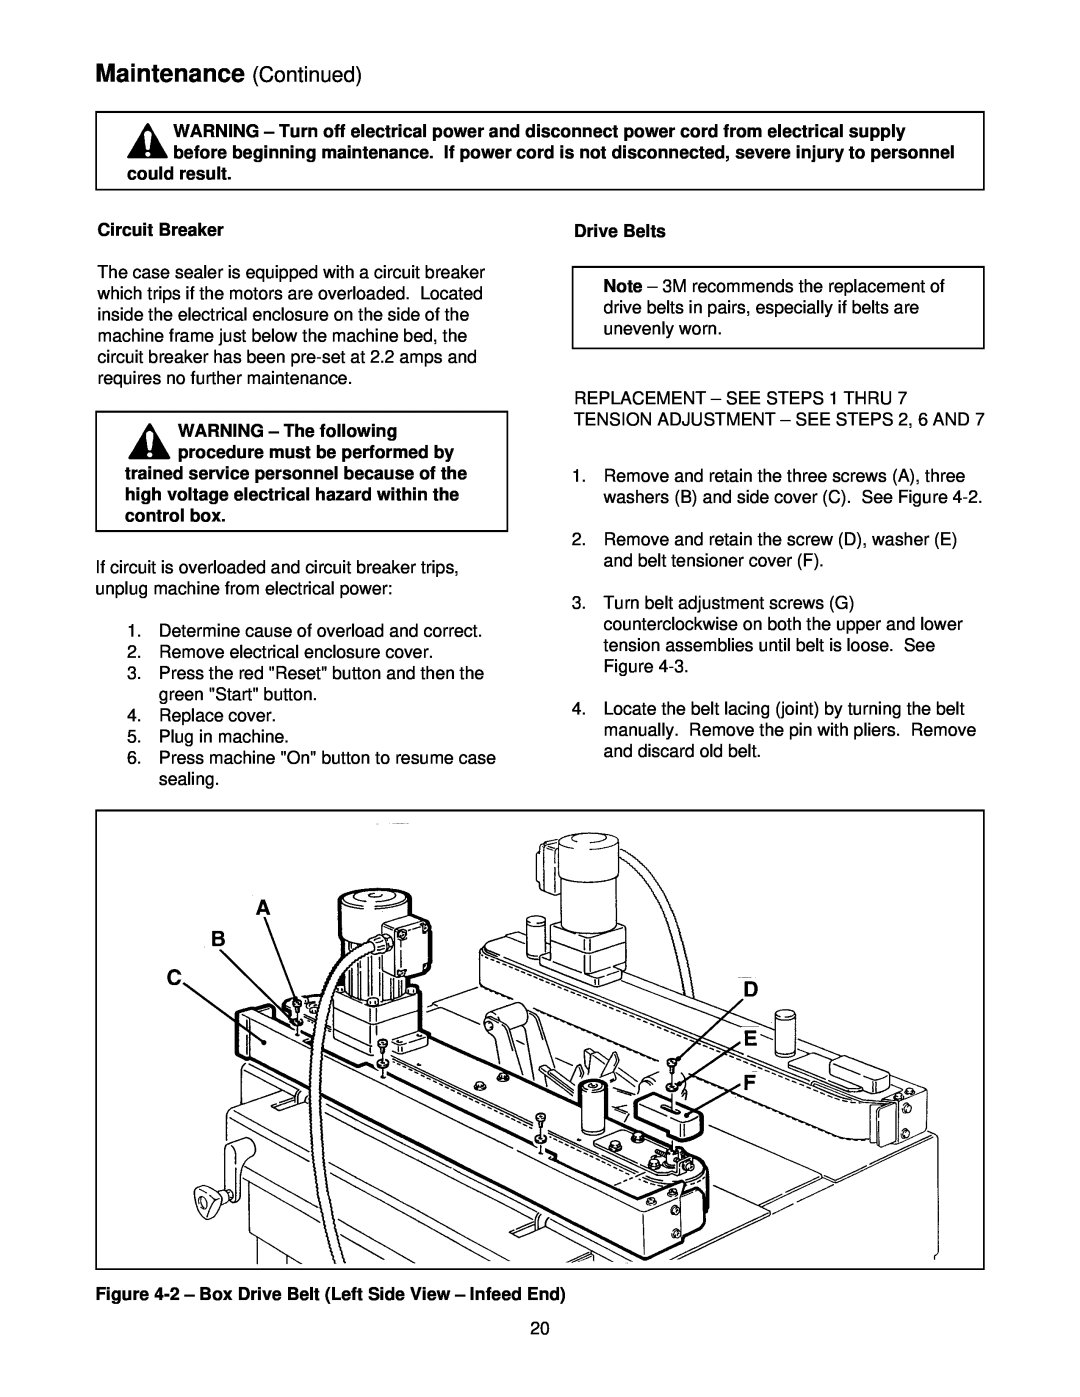 3M 800ab 39600 manual could result, Circuit Breaker, WARNING - The following procedure must be performed by, Drive Belts 